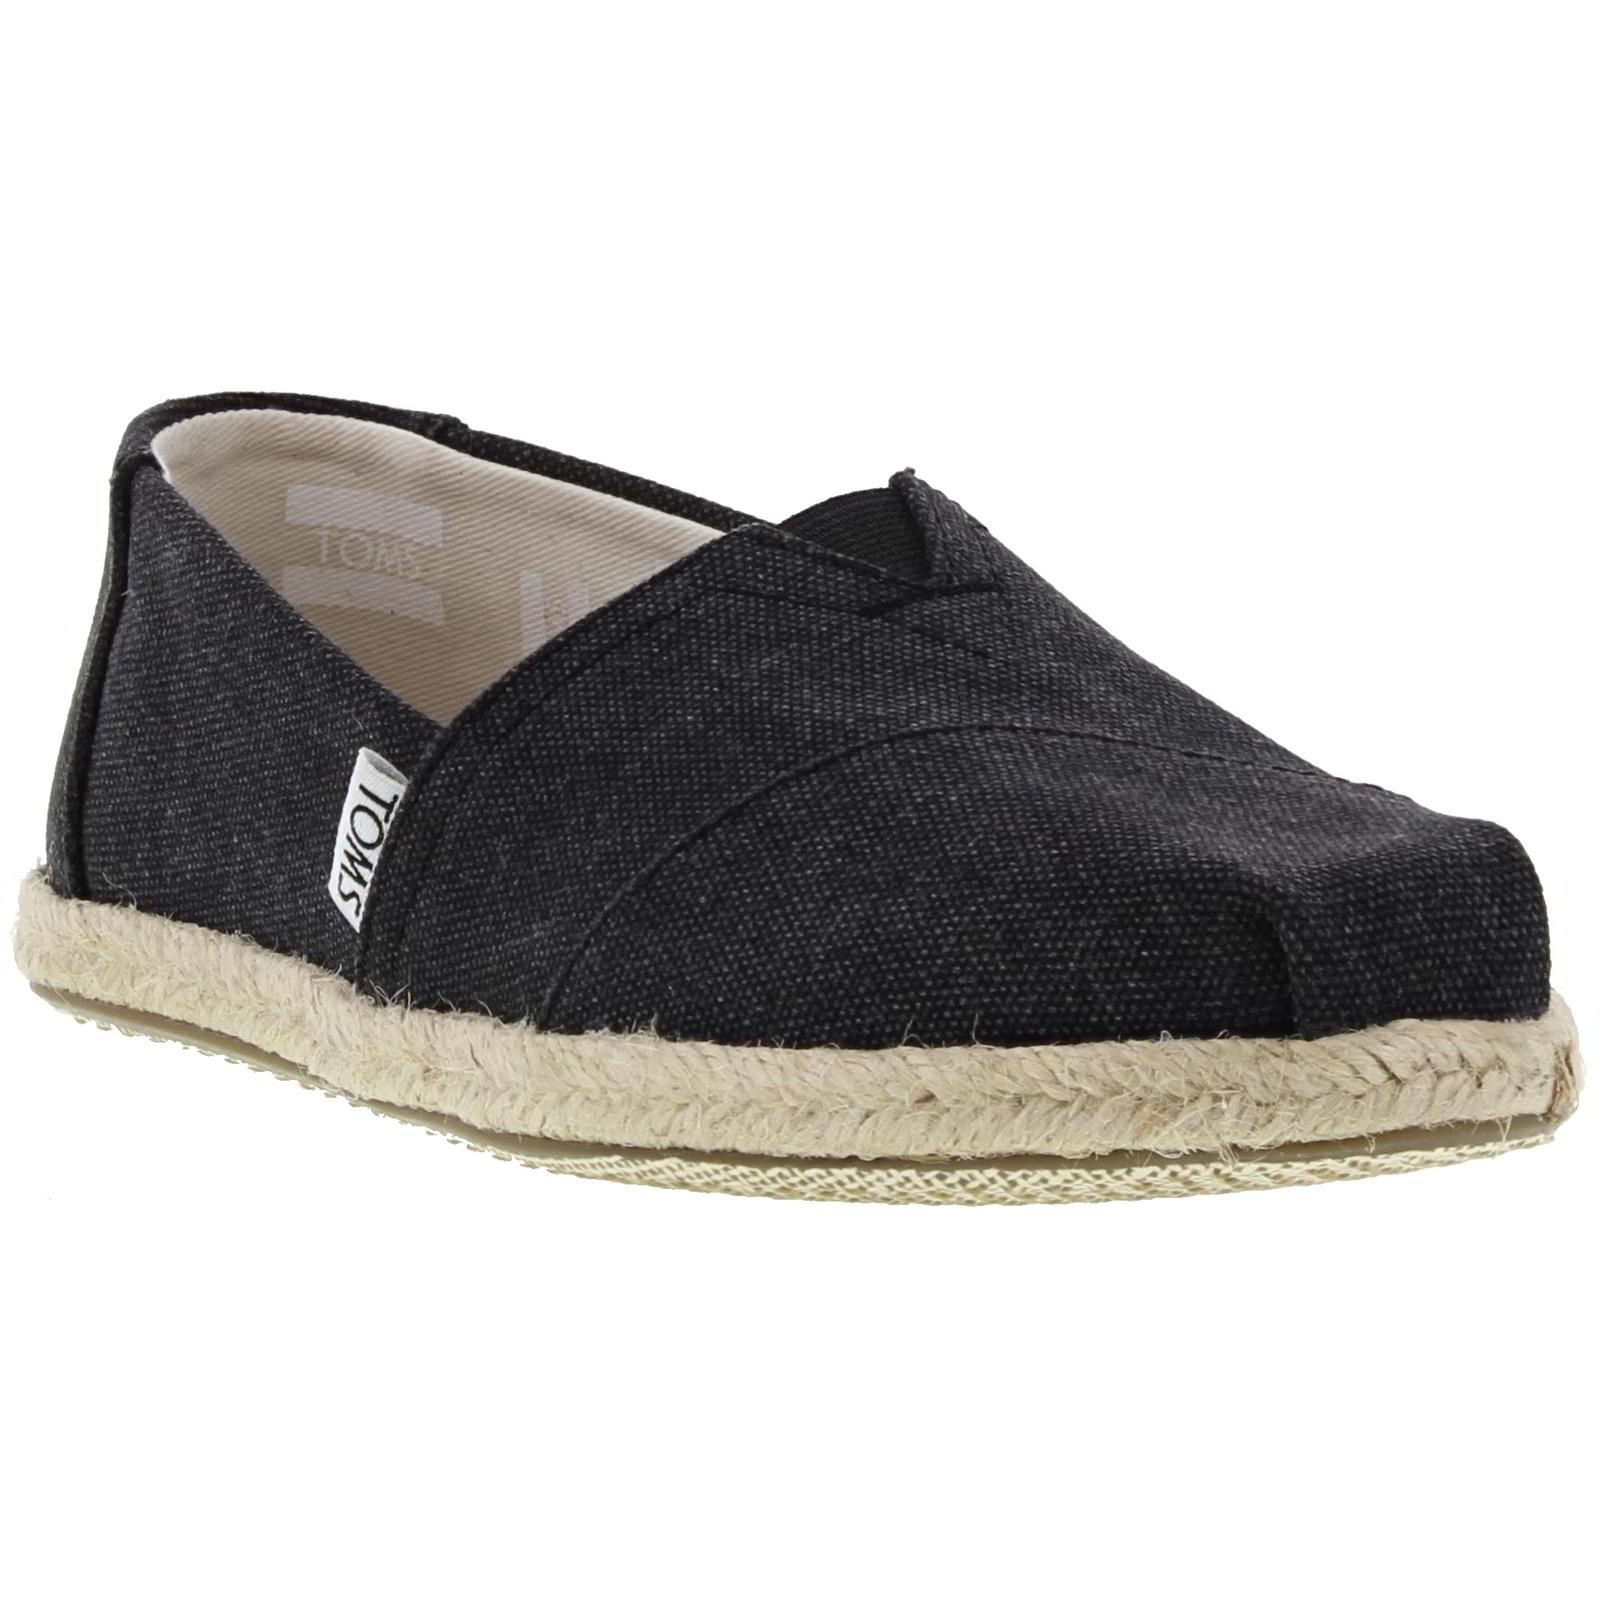 TOMS Toms Womens Classic Espadrille Vegan Shoes - Black Washed 2951